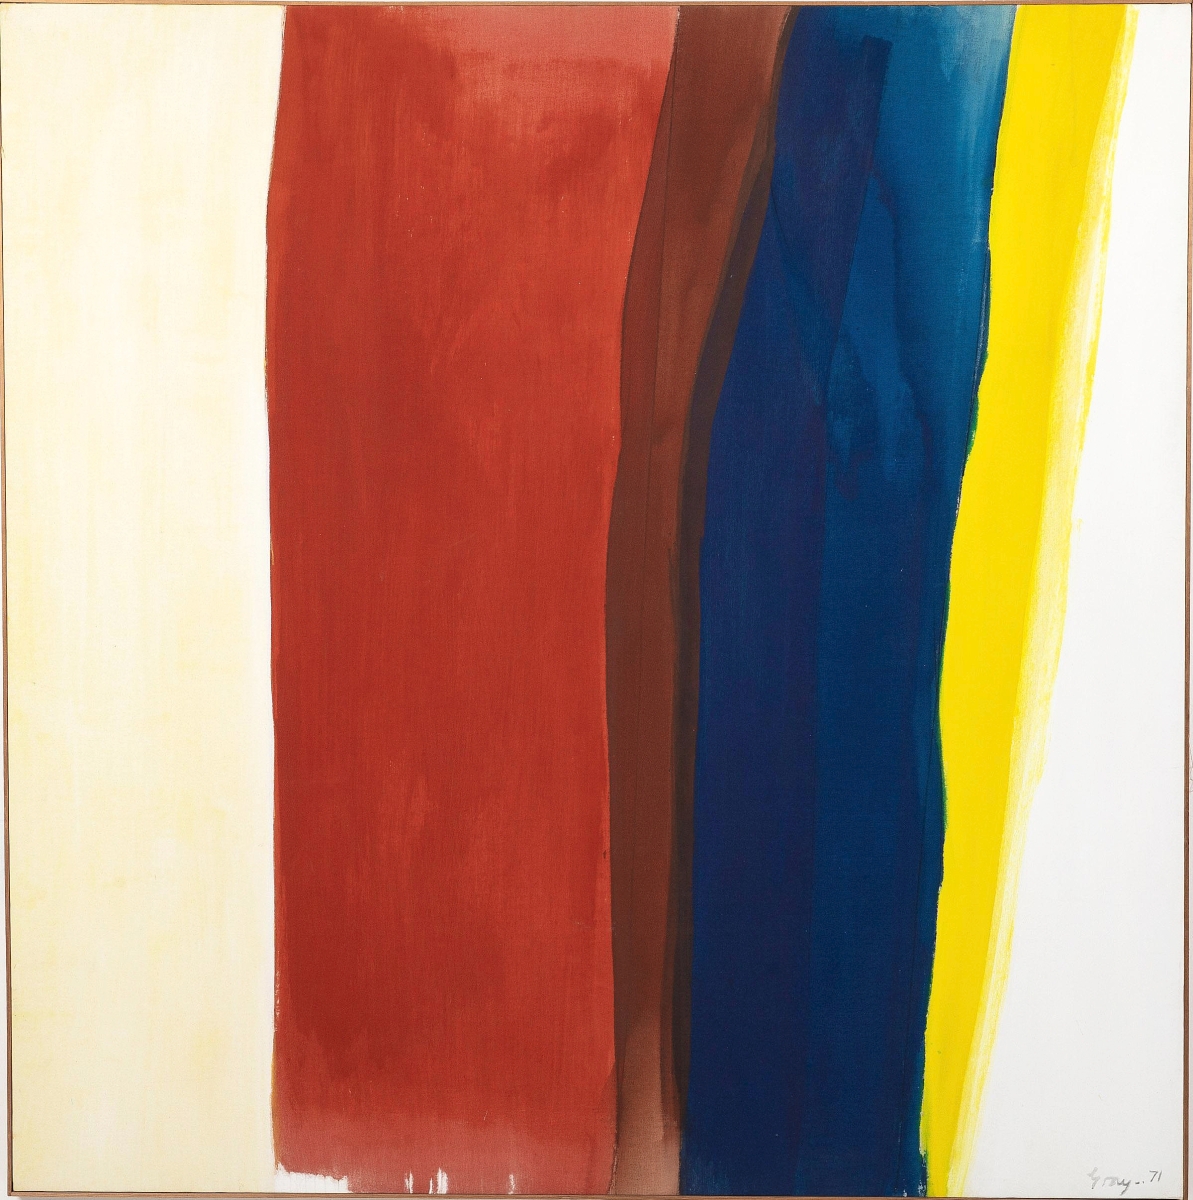 The third highest price in the sale — $18,750 — was realized by this abstract color field oil on canvas titled “Captain Cook” by Cleve Gray (American, 1918-2004). An online buyer from the Midwest prevailed for the 69½-by-68¾-inch work ($8/12,000).